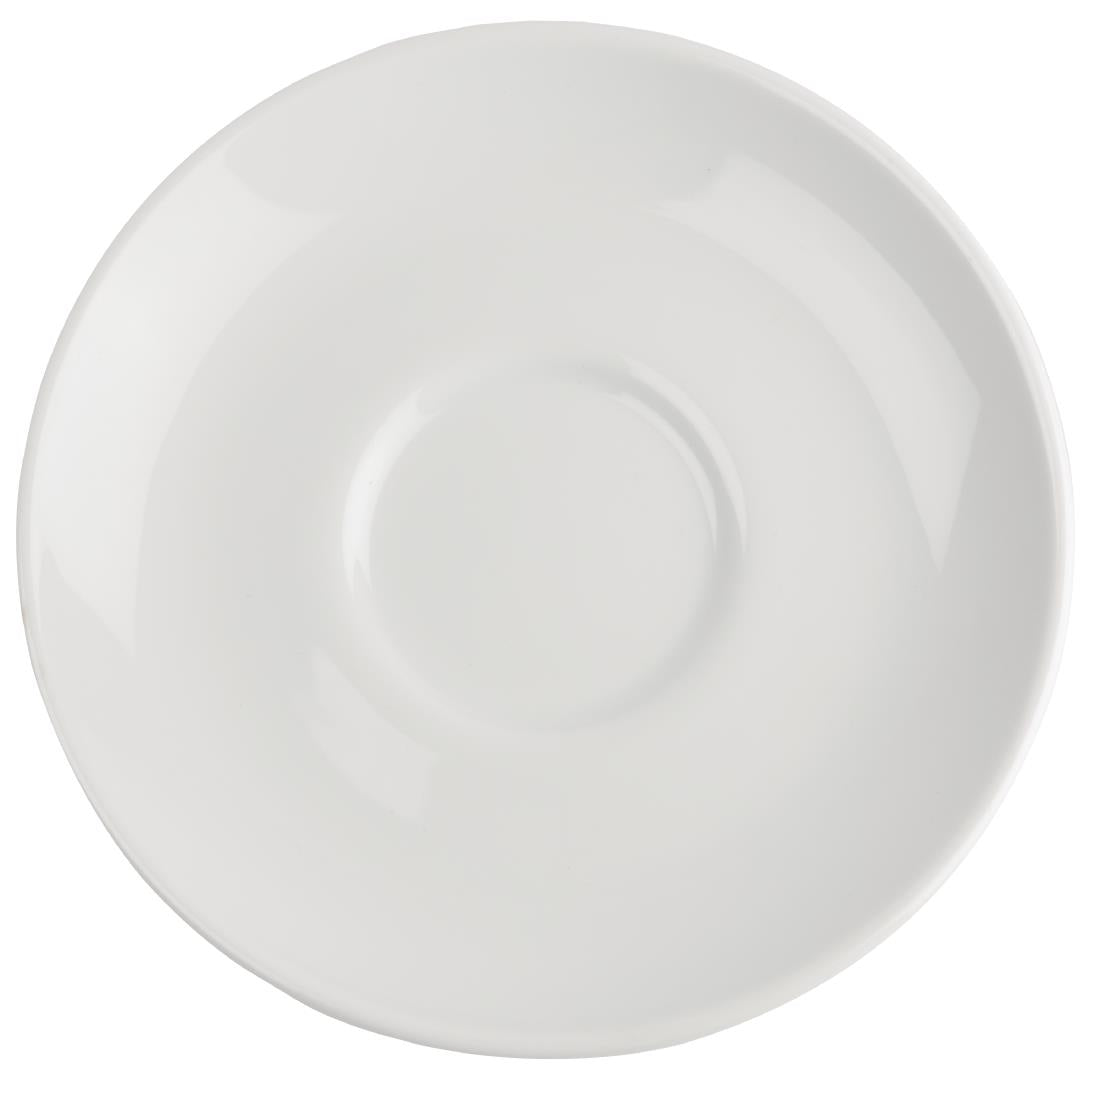 CG031 Royal Porcelain Classic White Cappuccino Saucers 150mm (Pack of 12)